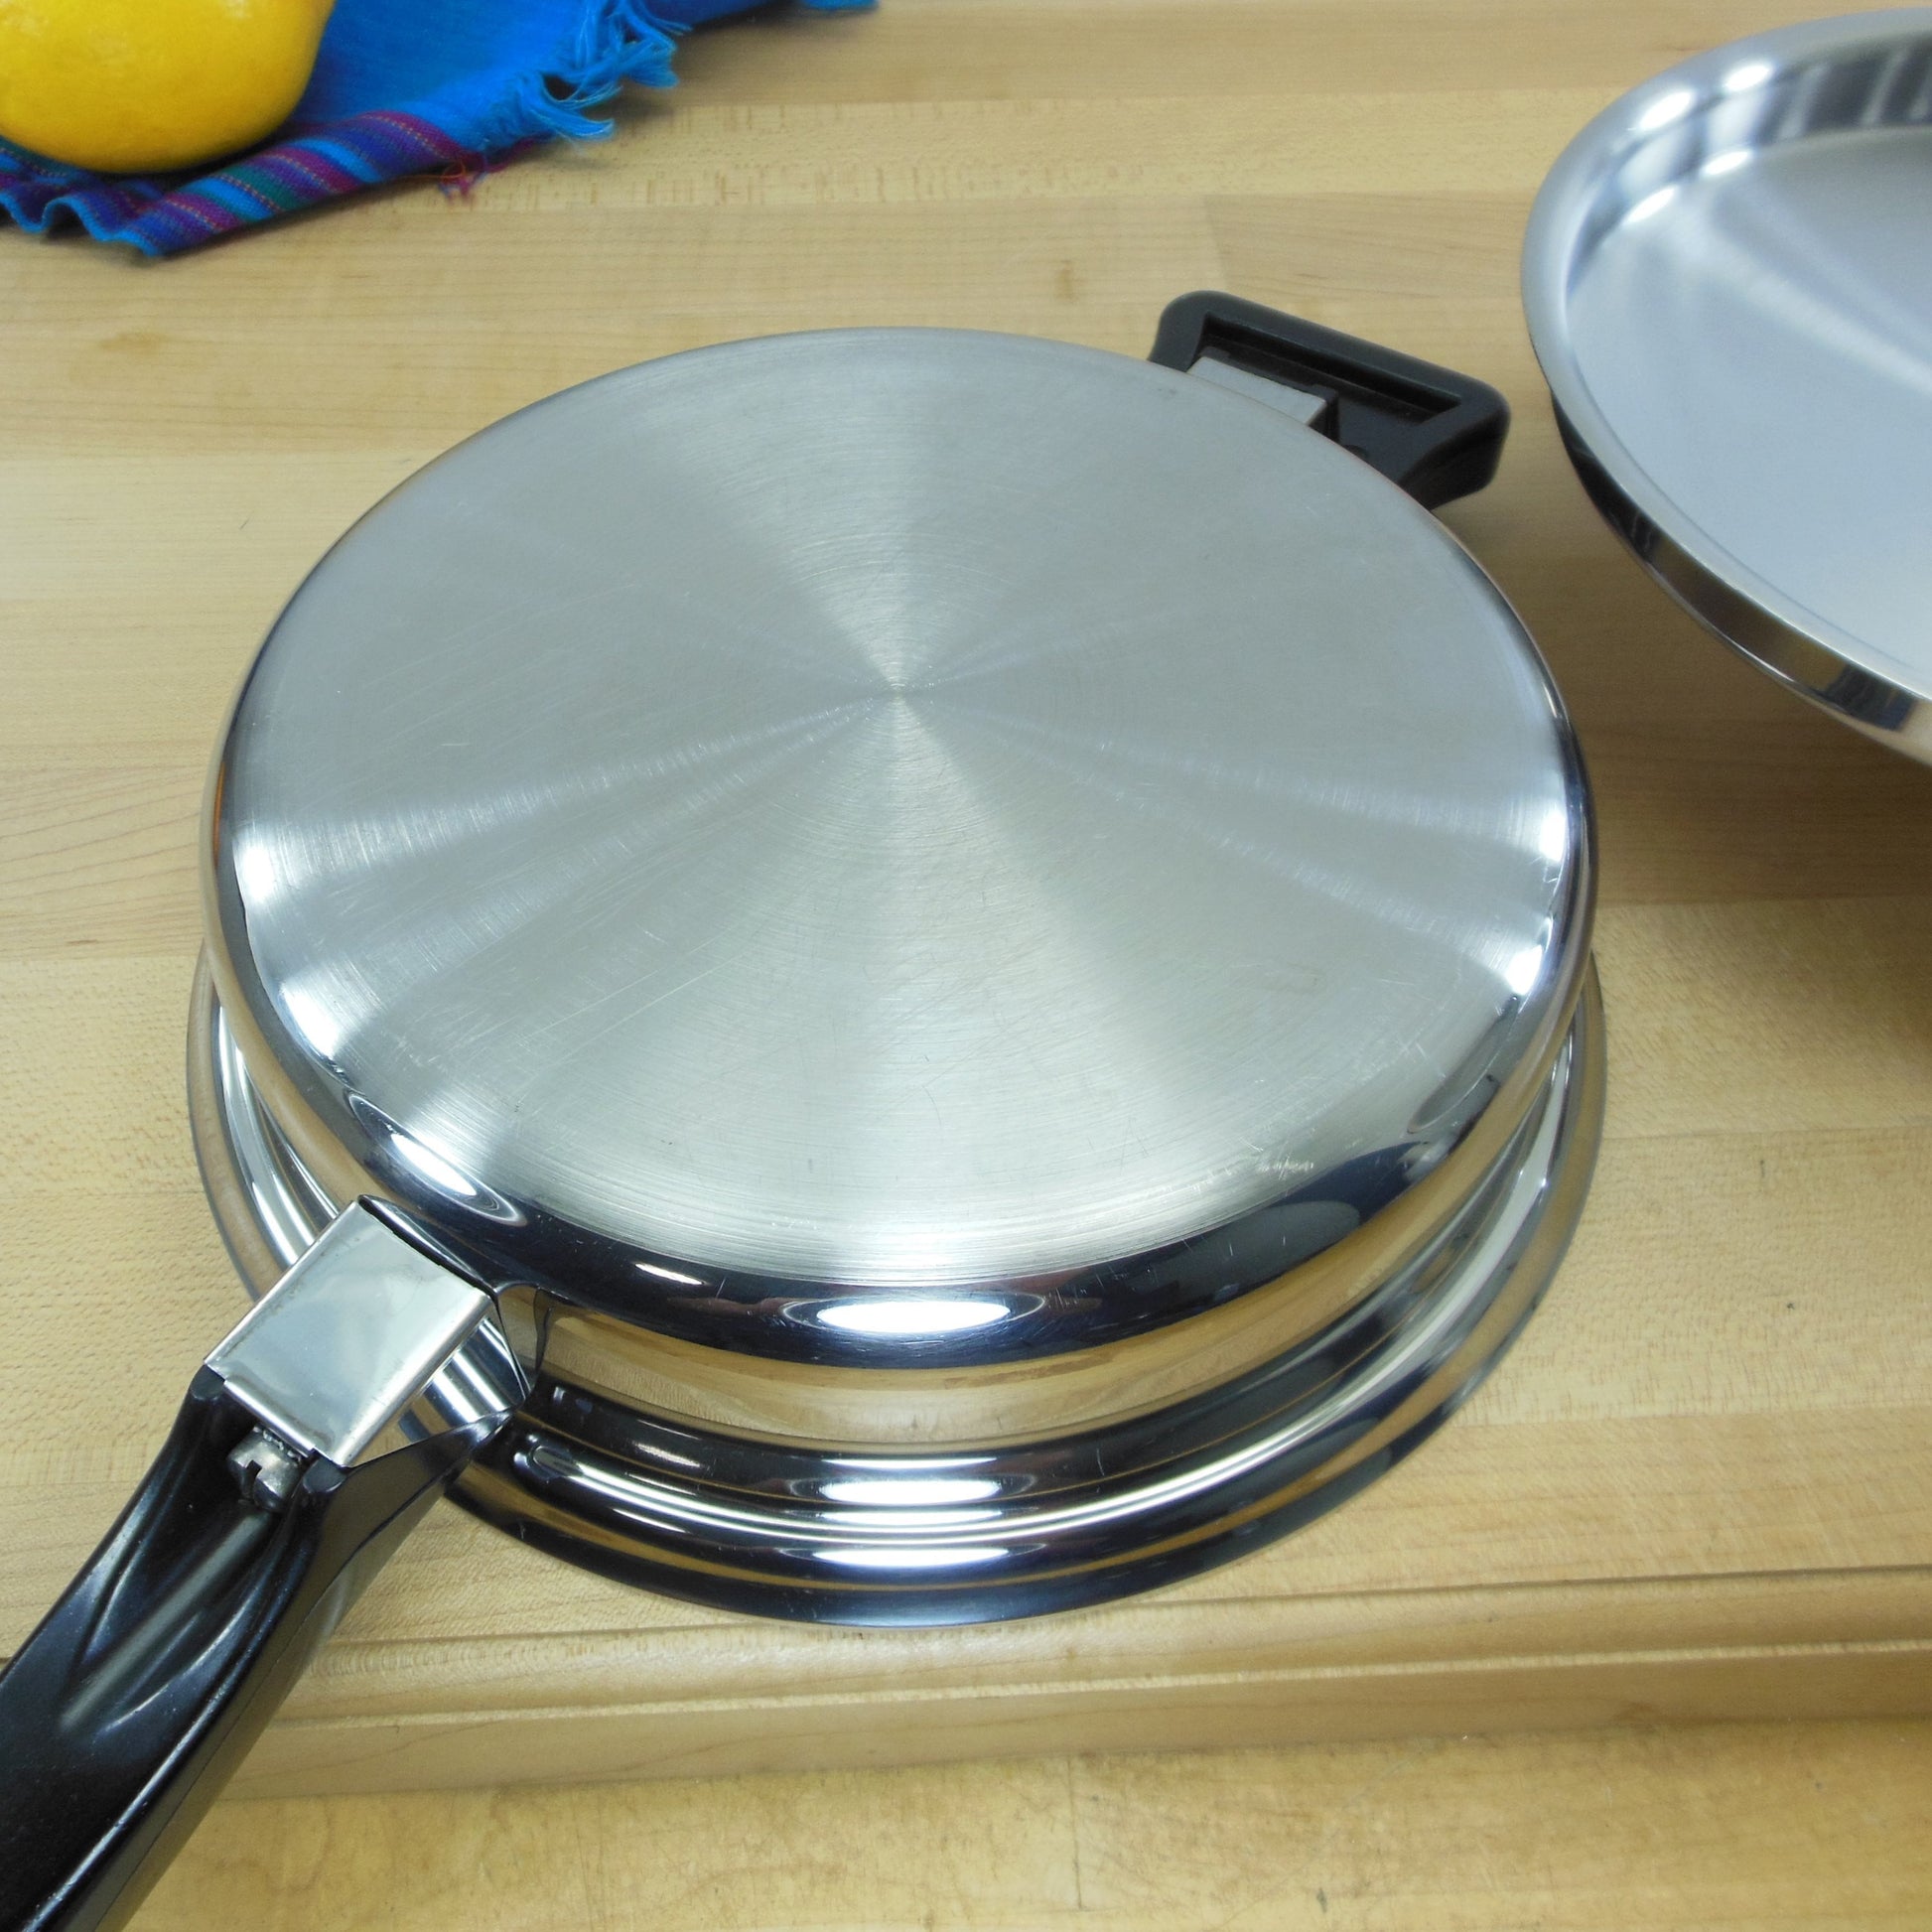 Health Craft Cookware Tampa Fl 304 Surgical Stainless 7.5" Skillet Saucepan Cleaned